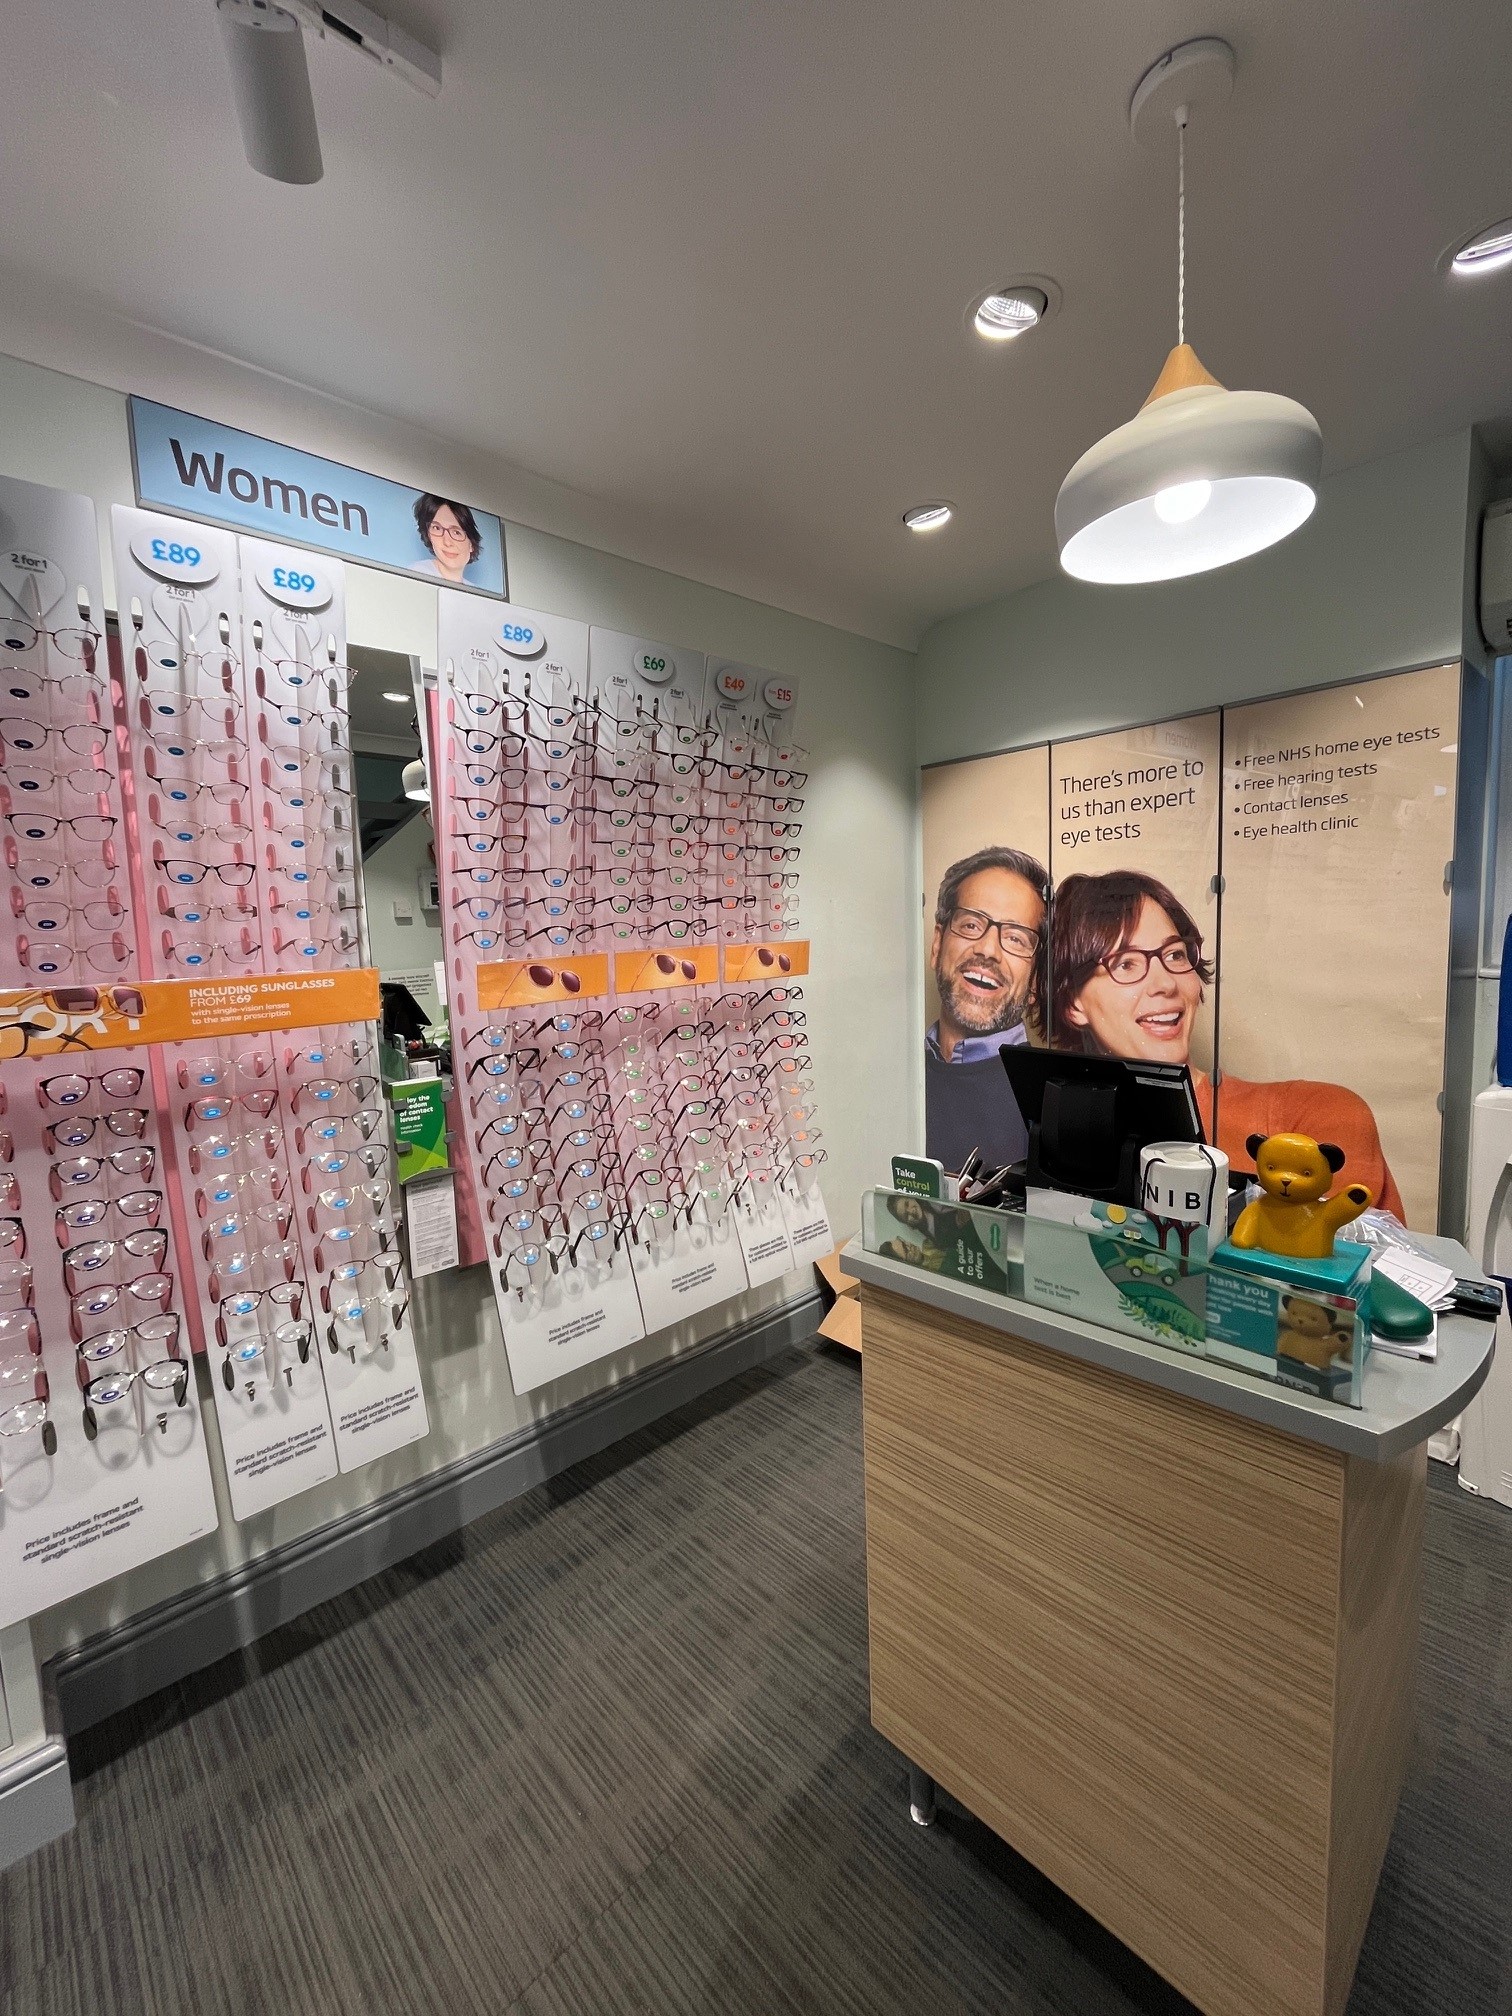 Images Specsavers Opticians and Audiologists - Pocklington